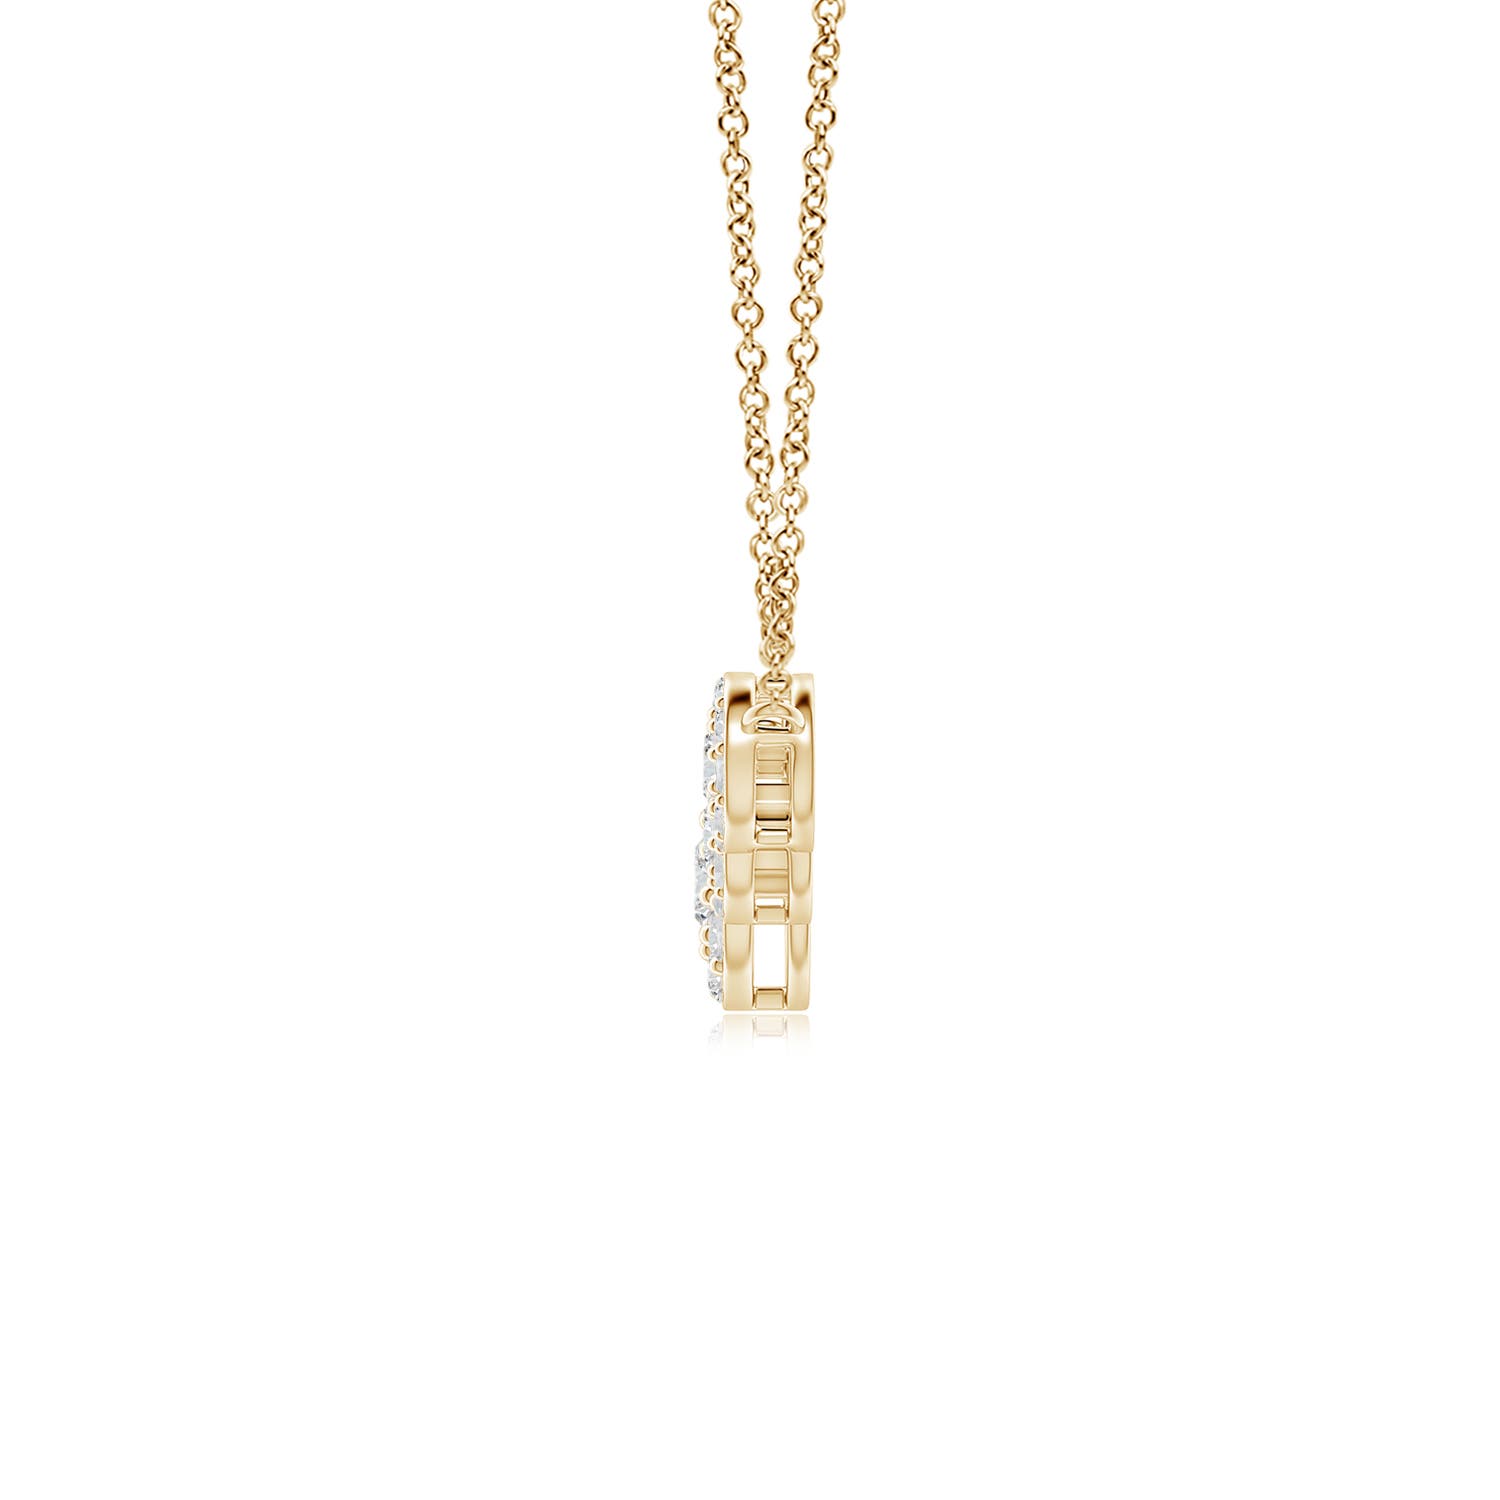 H, SI2 / 2.01 CT / 14 KT Yellow Gold